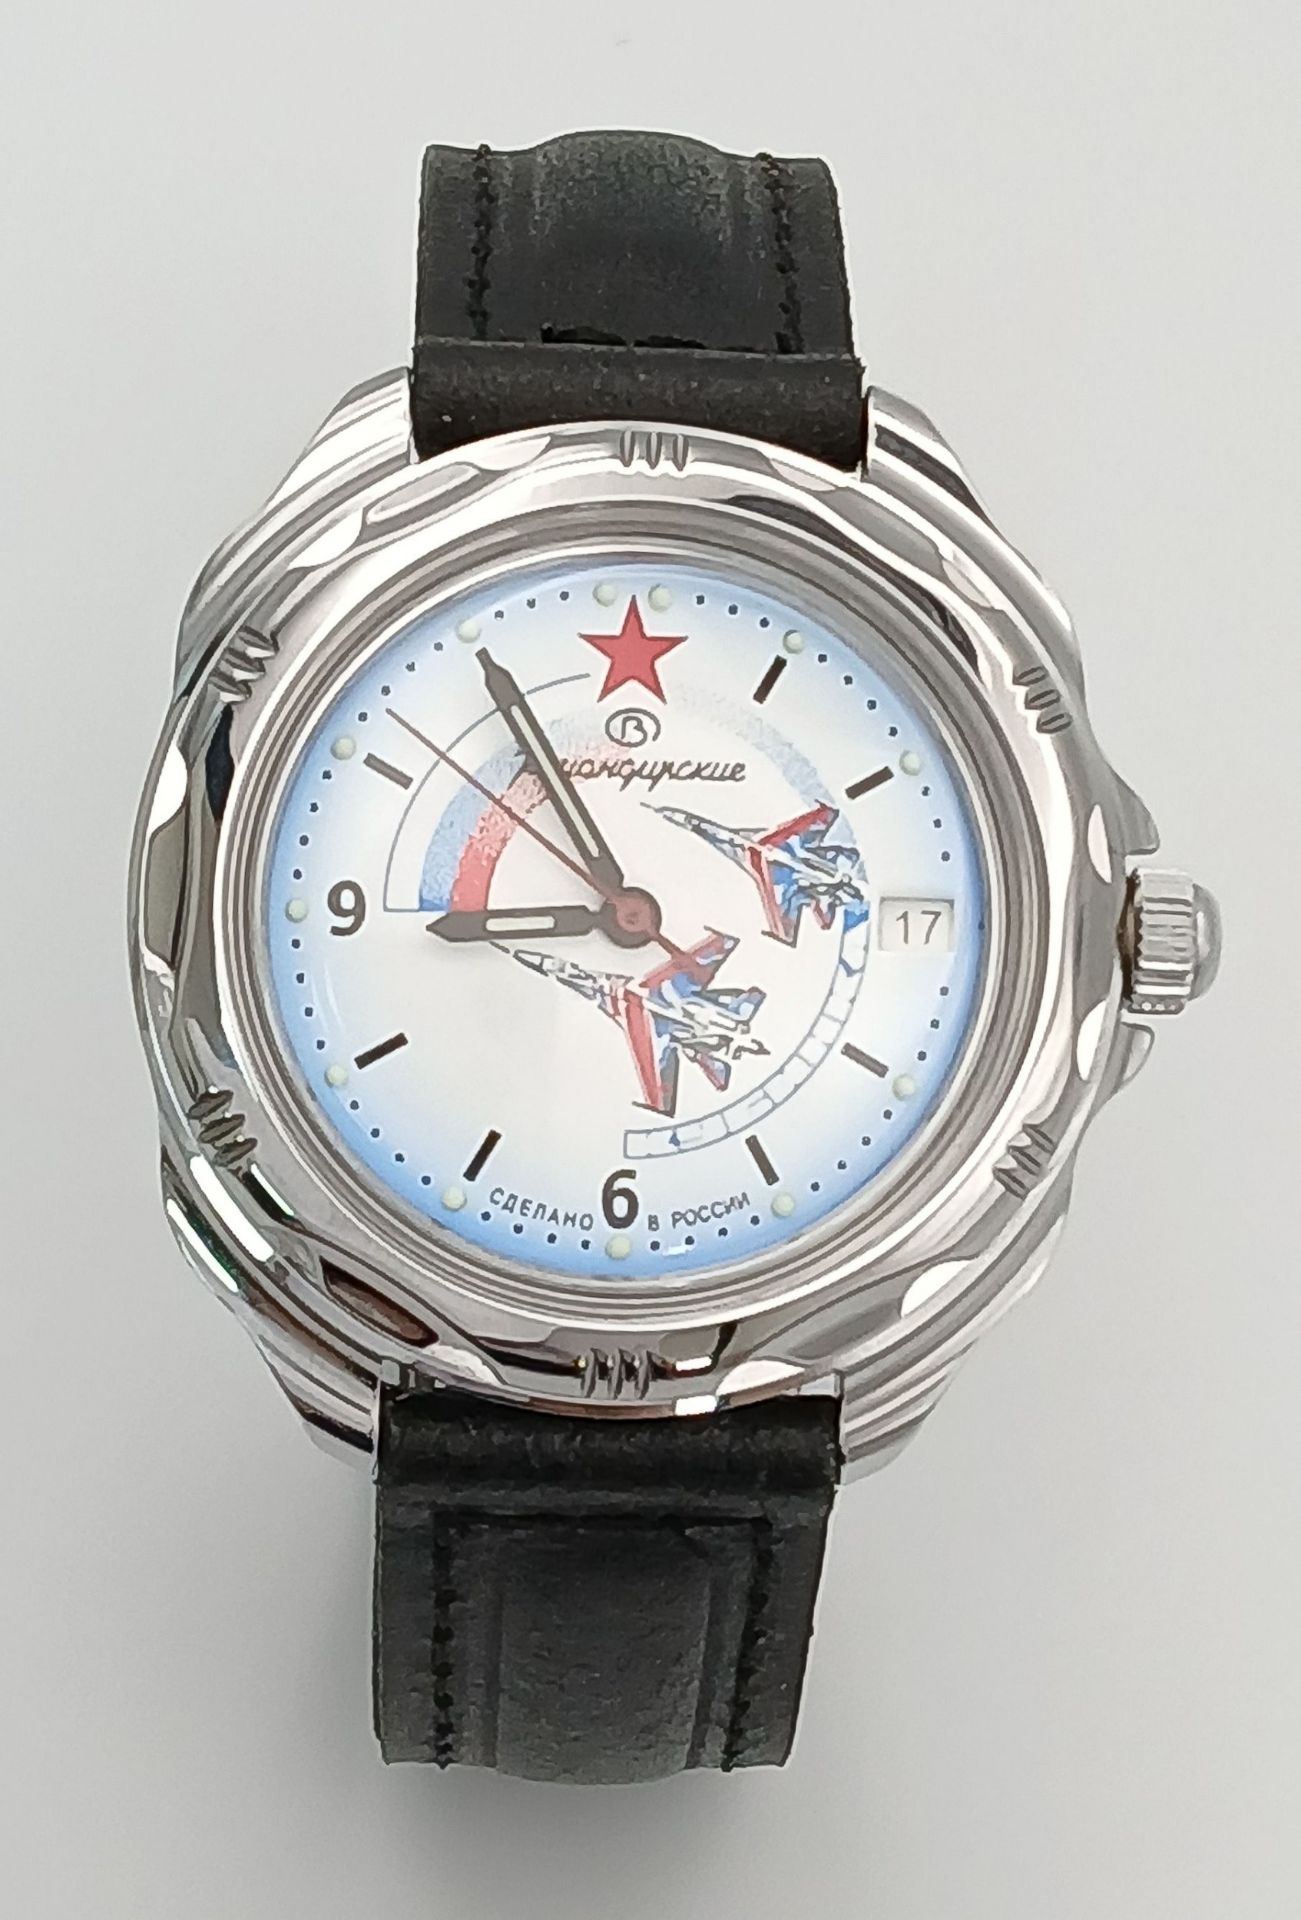 A Vostok Manual Gents Watch. Black leather strap. Stainless steel case - 40mm. White dial with date - Bild 2 aus 7